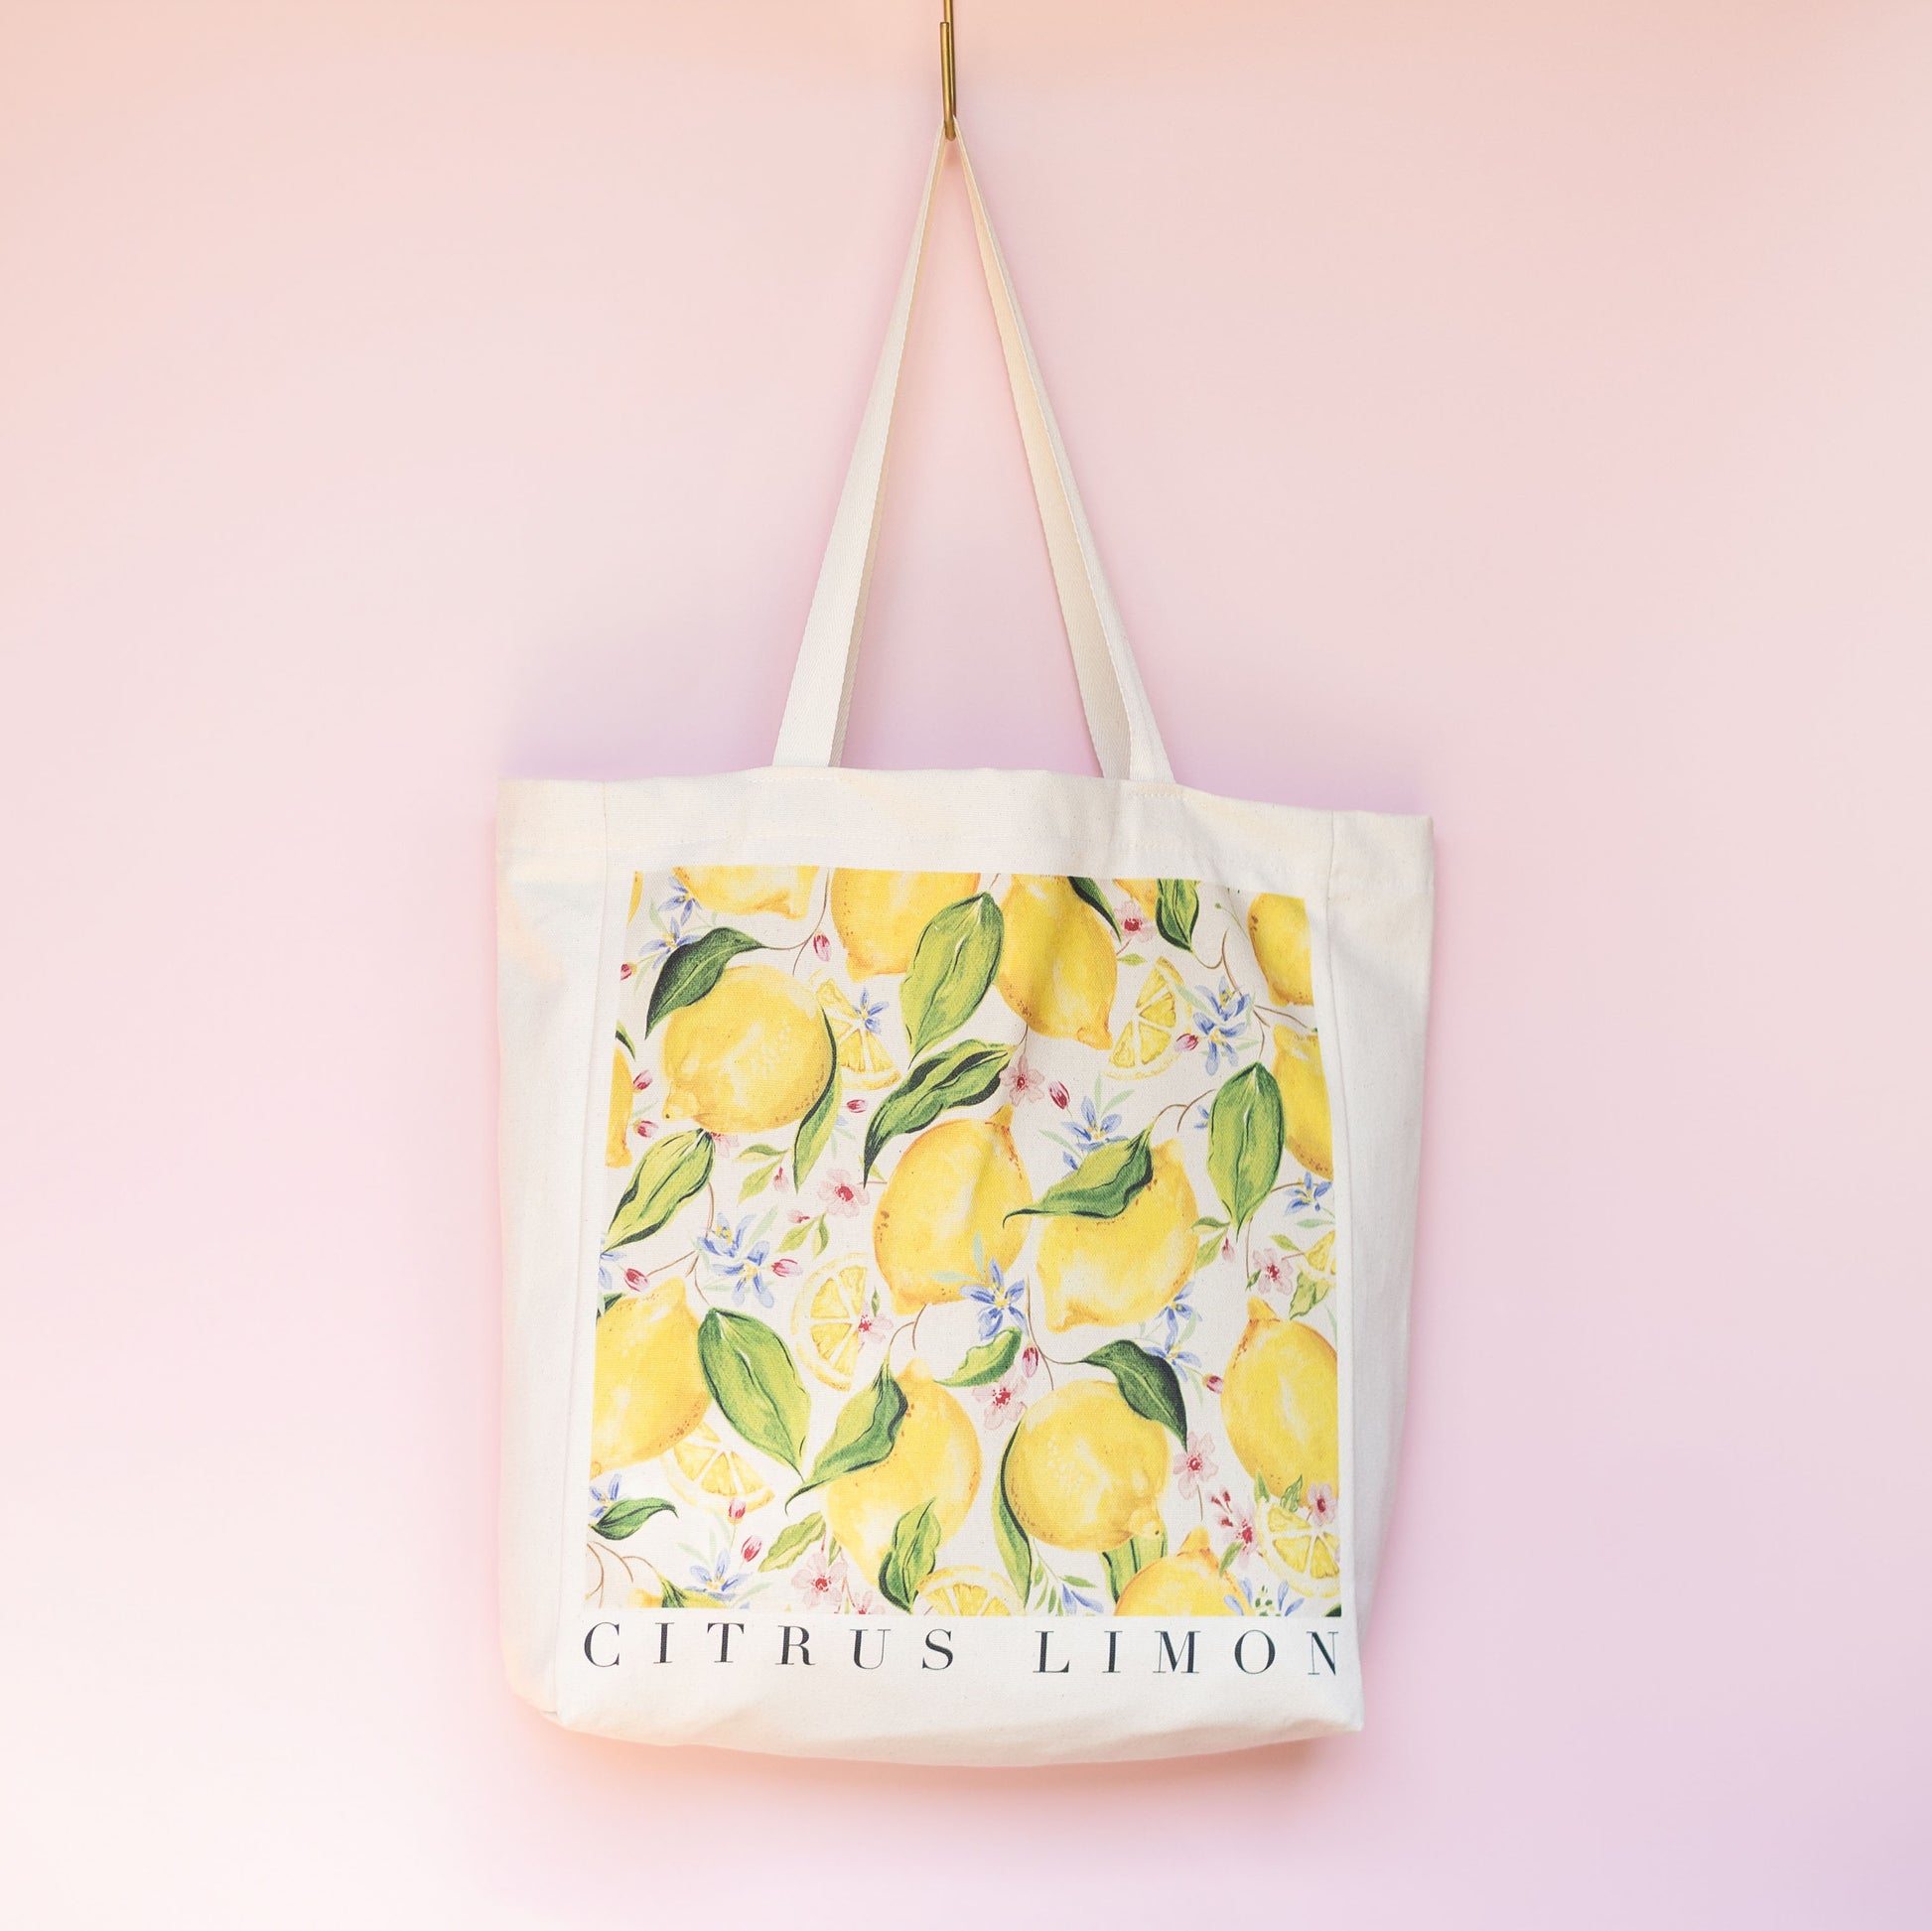 lemon print tote bag. Gusset side and bottom bag with an a5 inner pocket. Lemon and floral print originally hand painted by ellie mae.